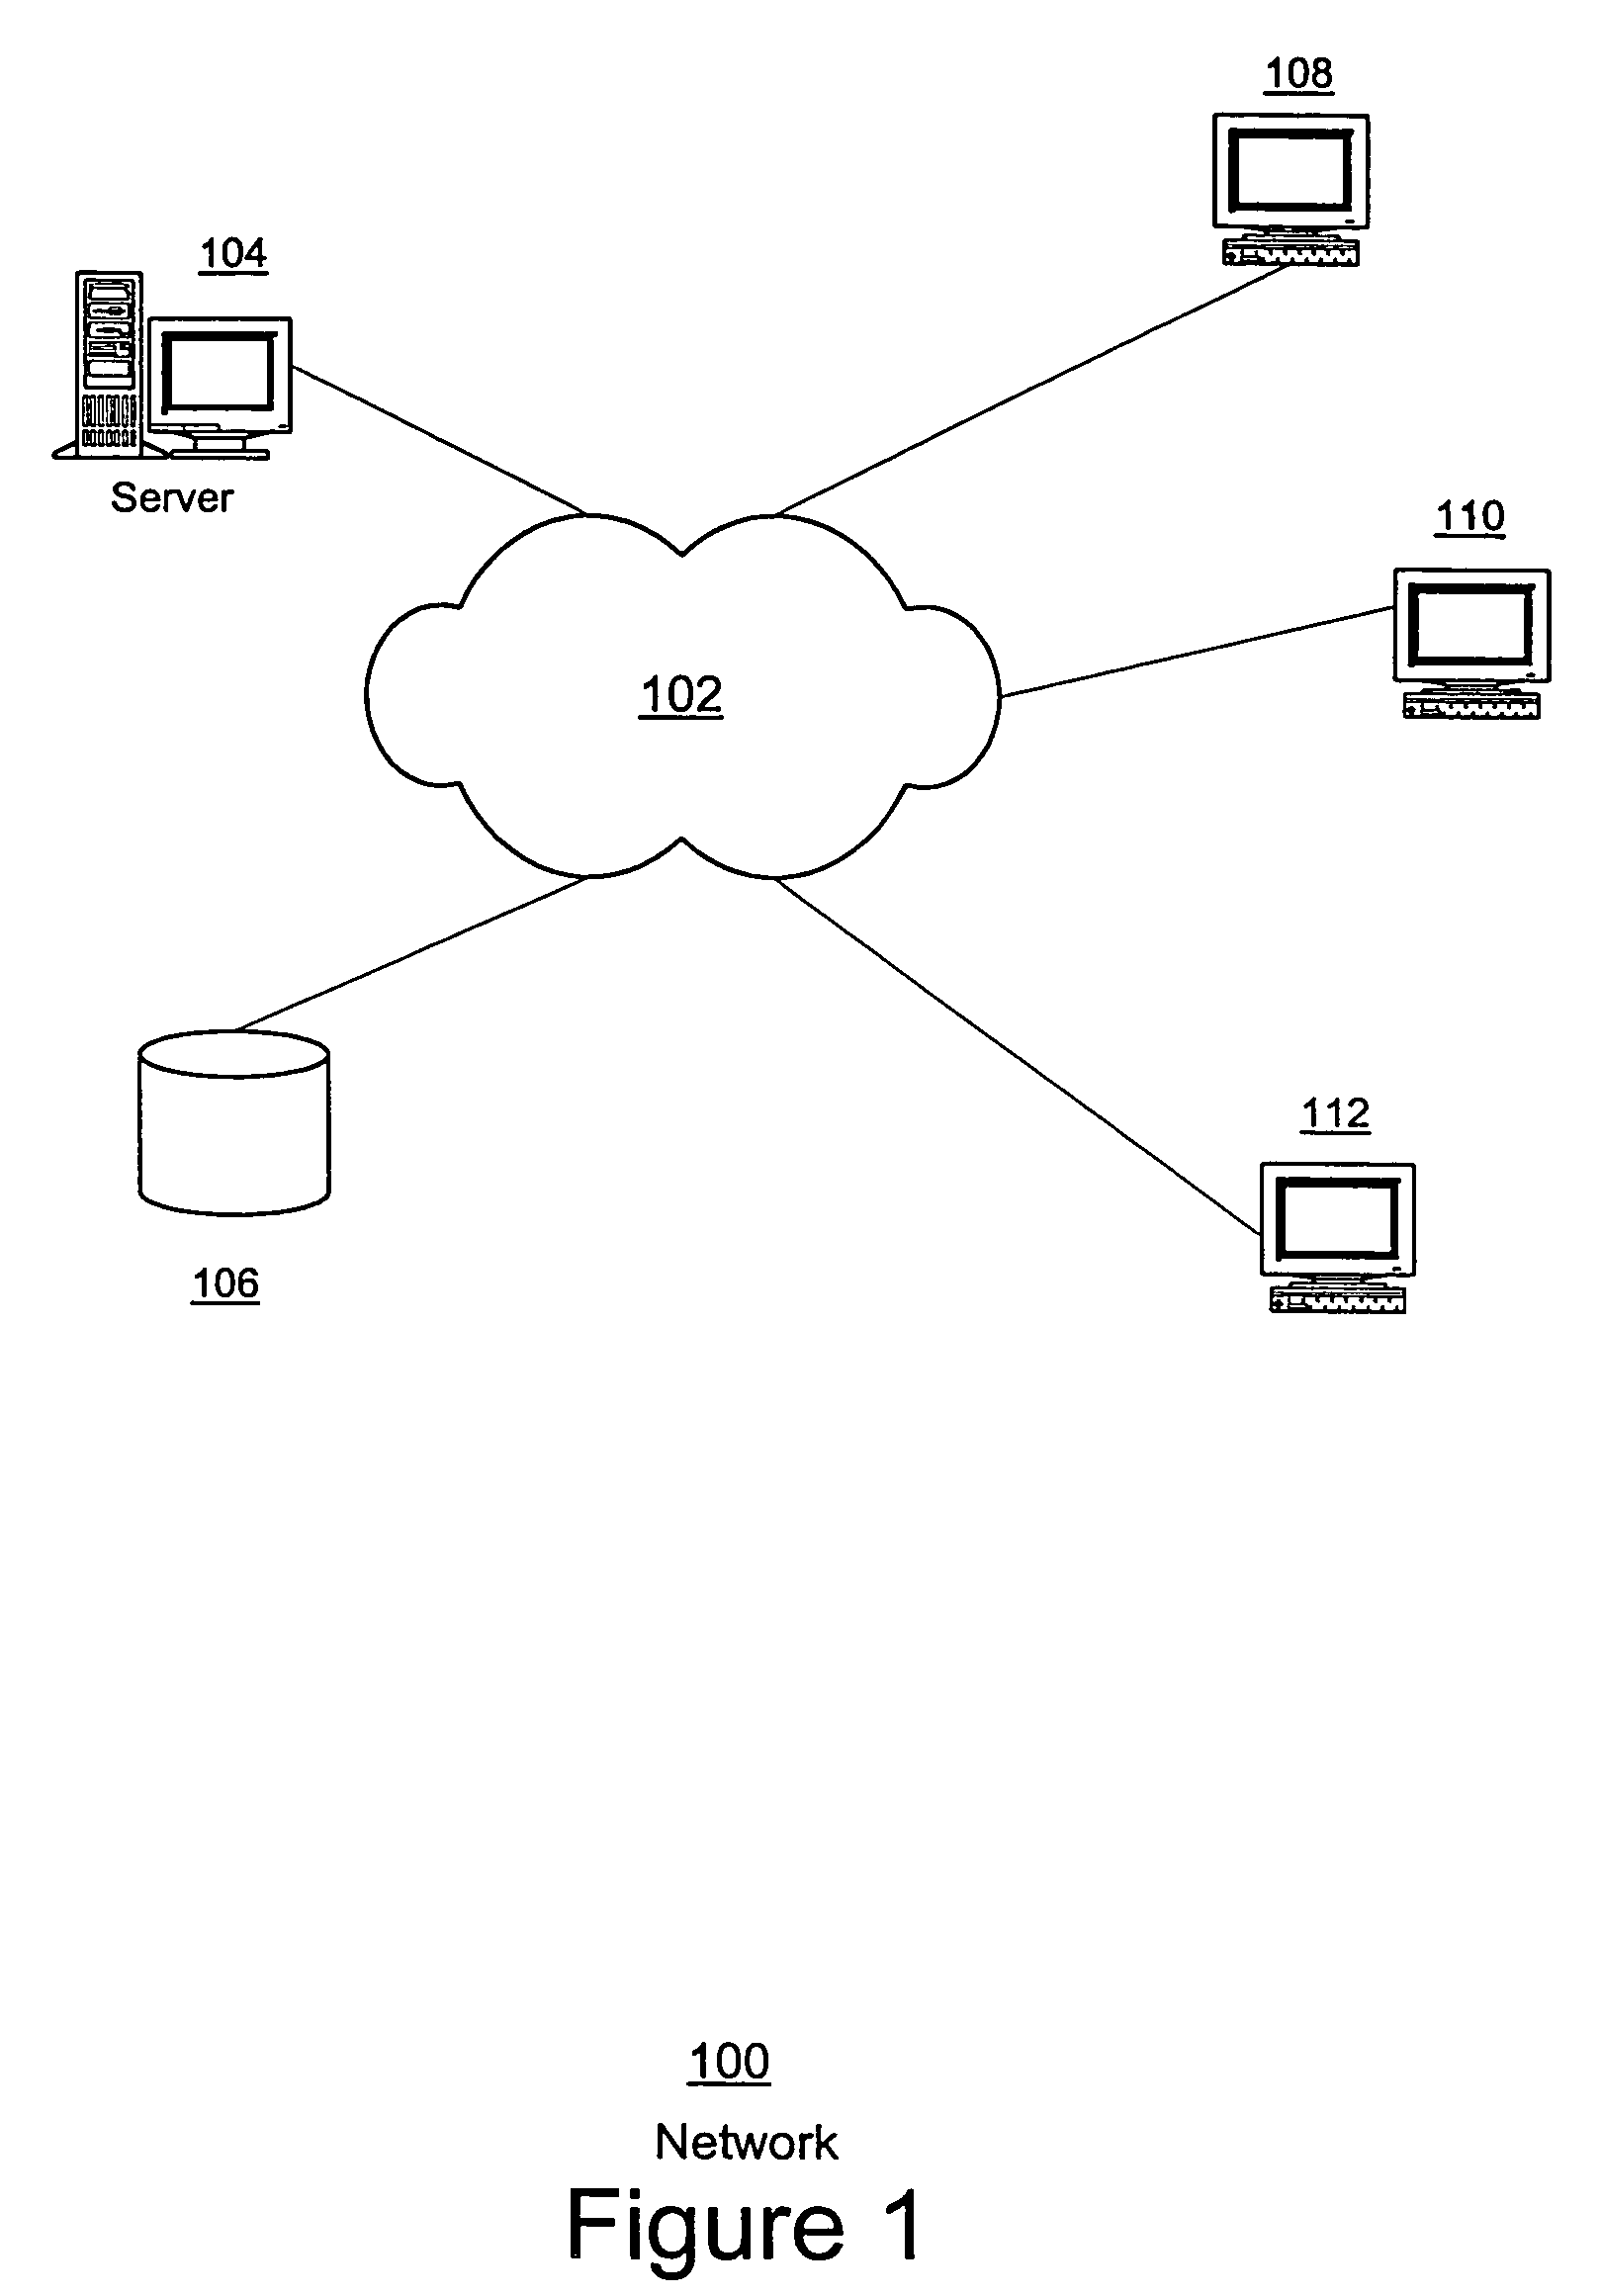 Process and system for a client object to perform a remote method invocation of a method in a server object